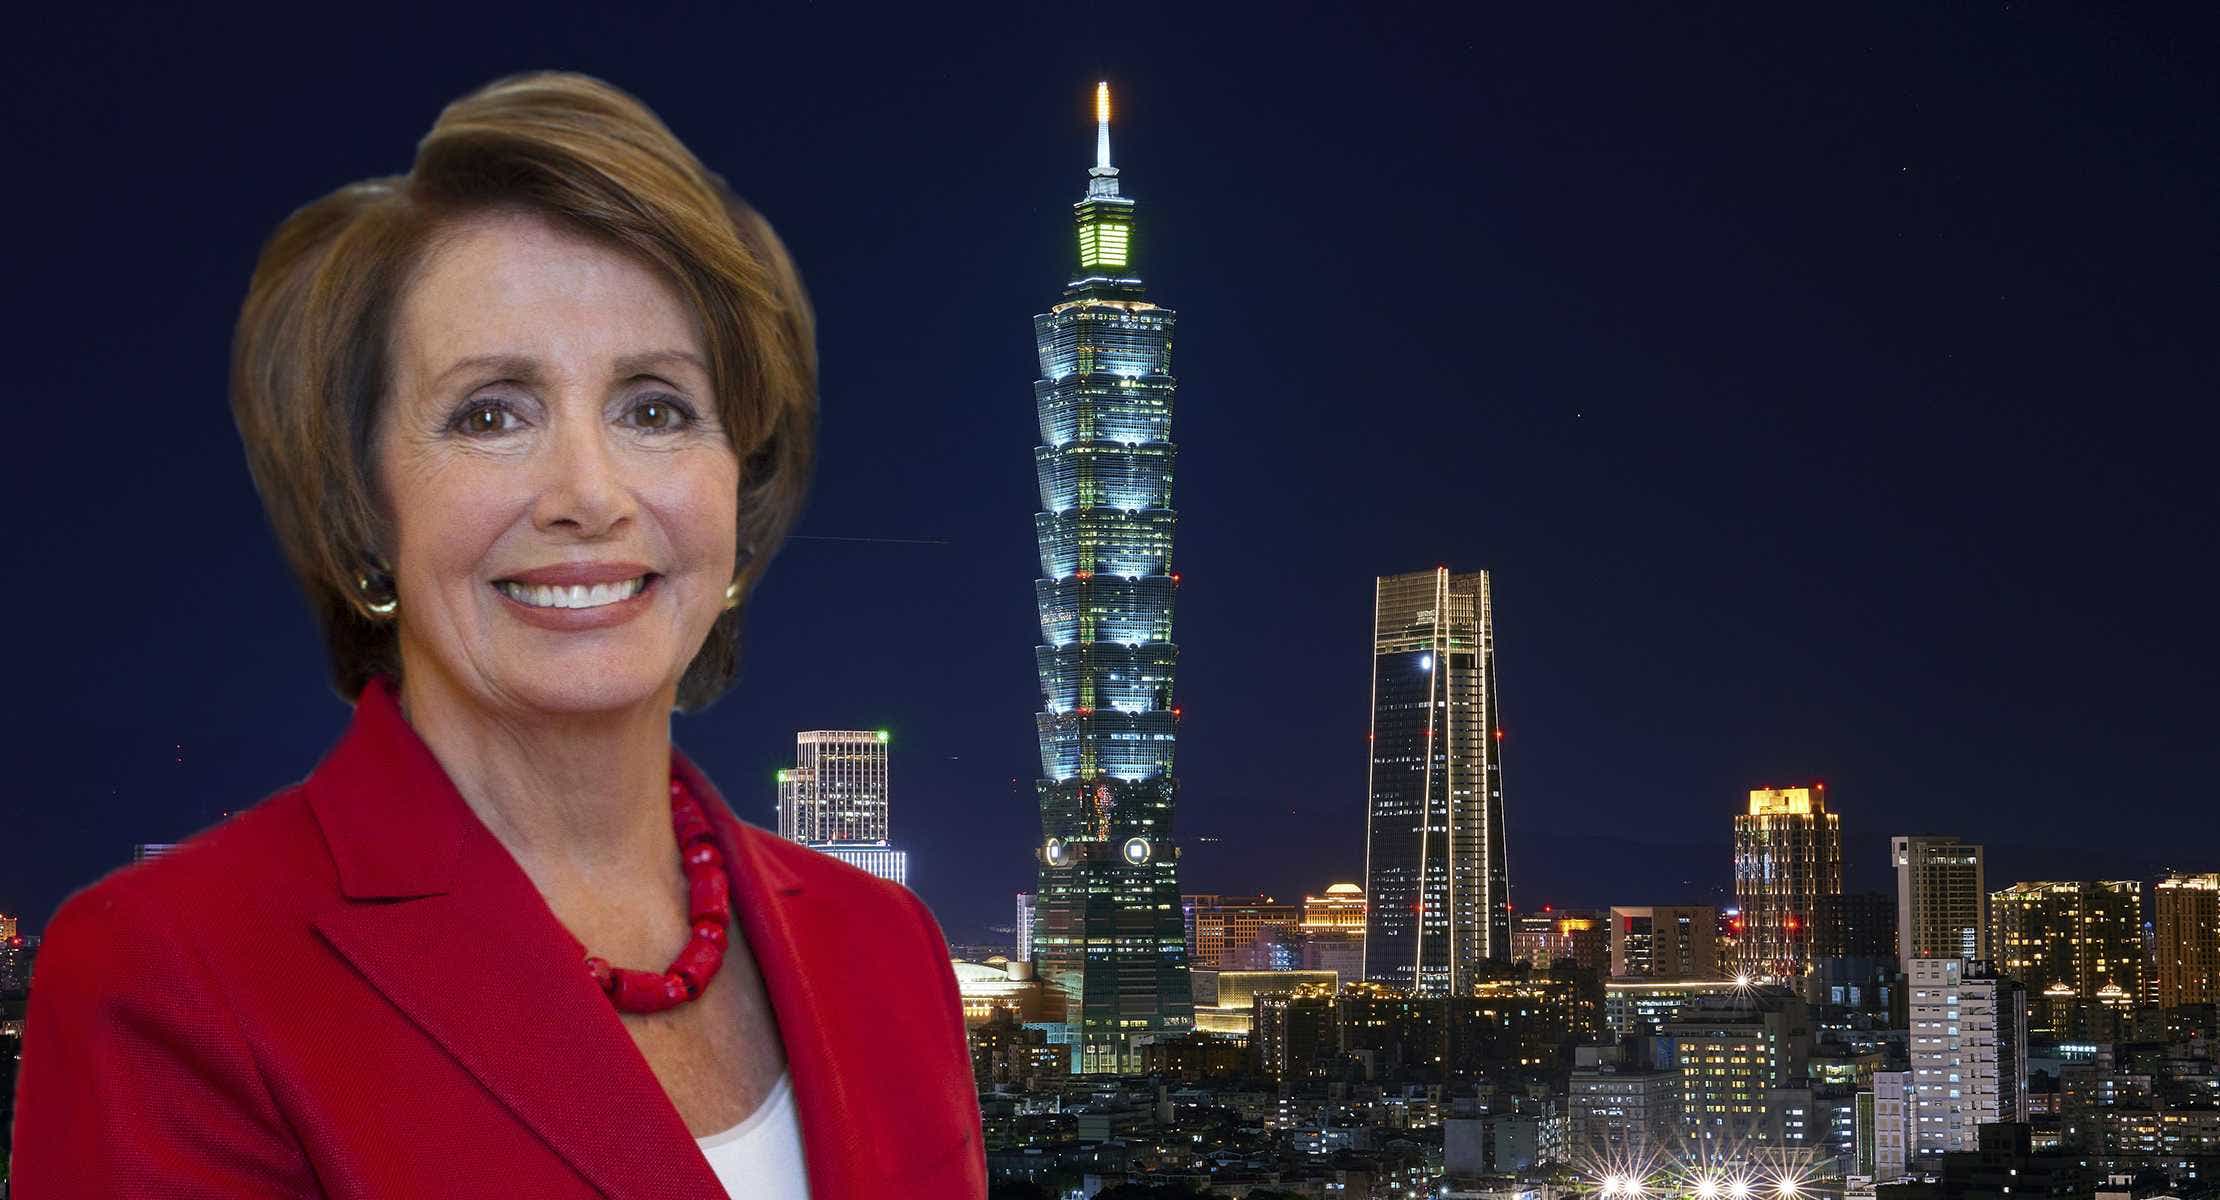 Nancy Pelosi Meets With Taiwan Semiconductor: Will It Help Line The Speaker's Pockets?